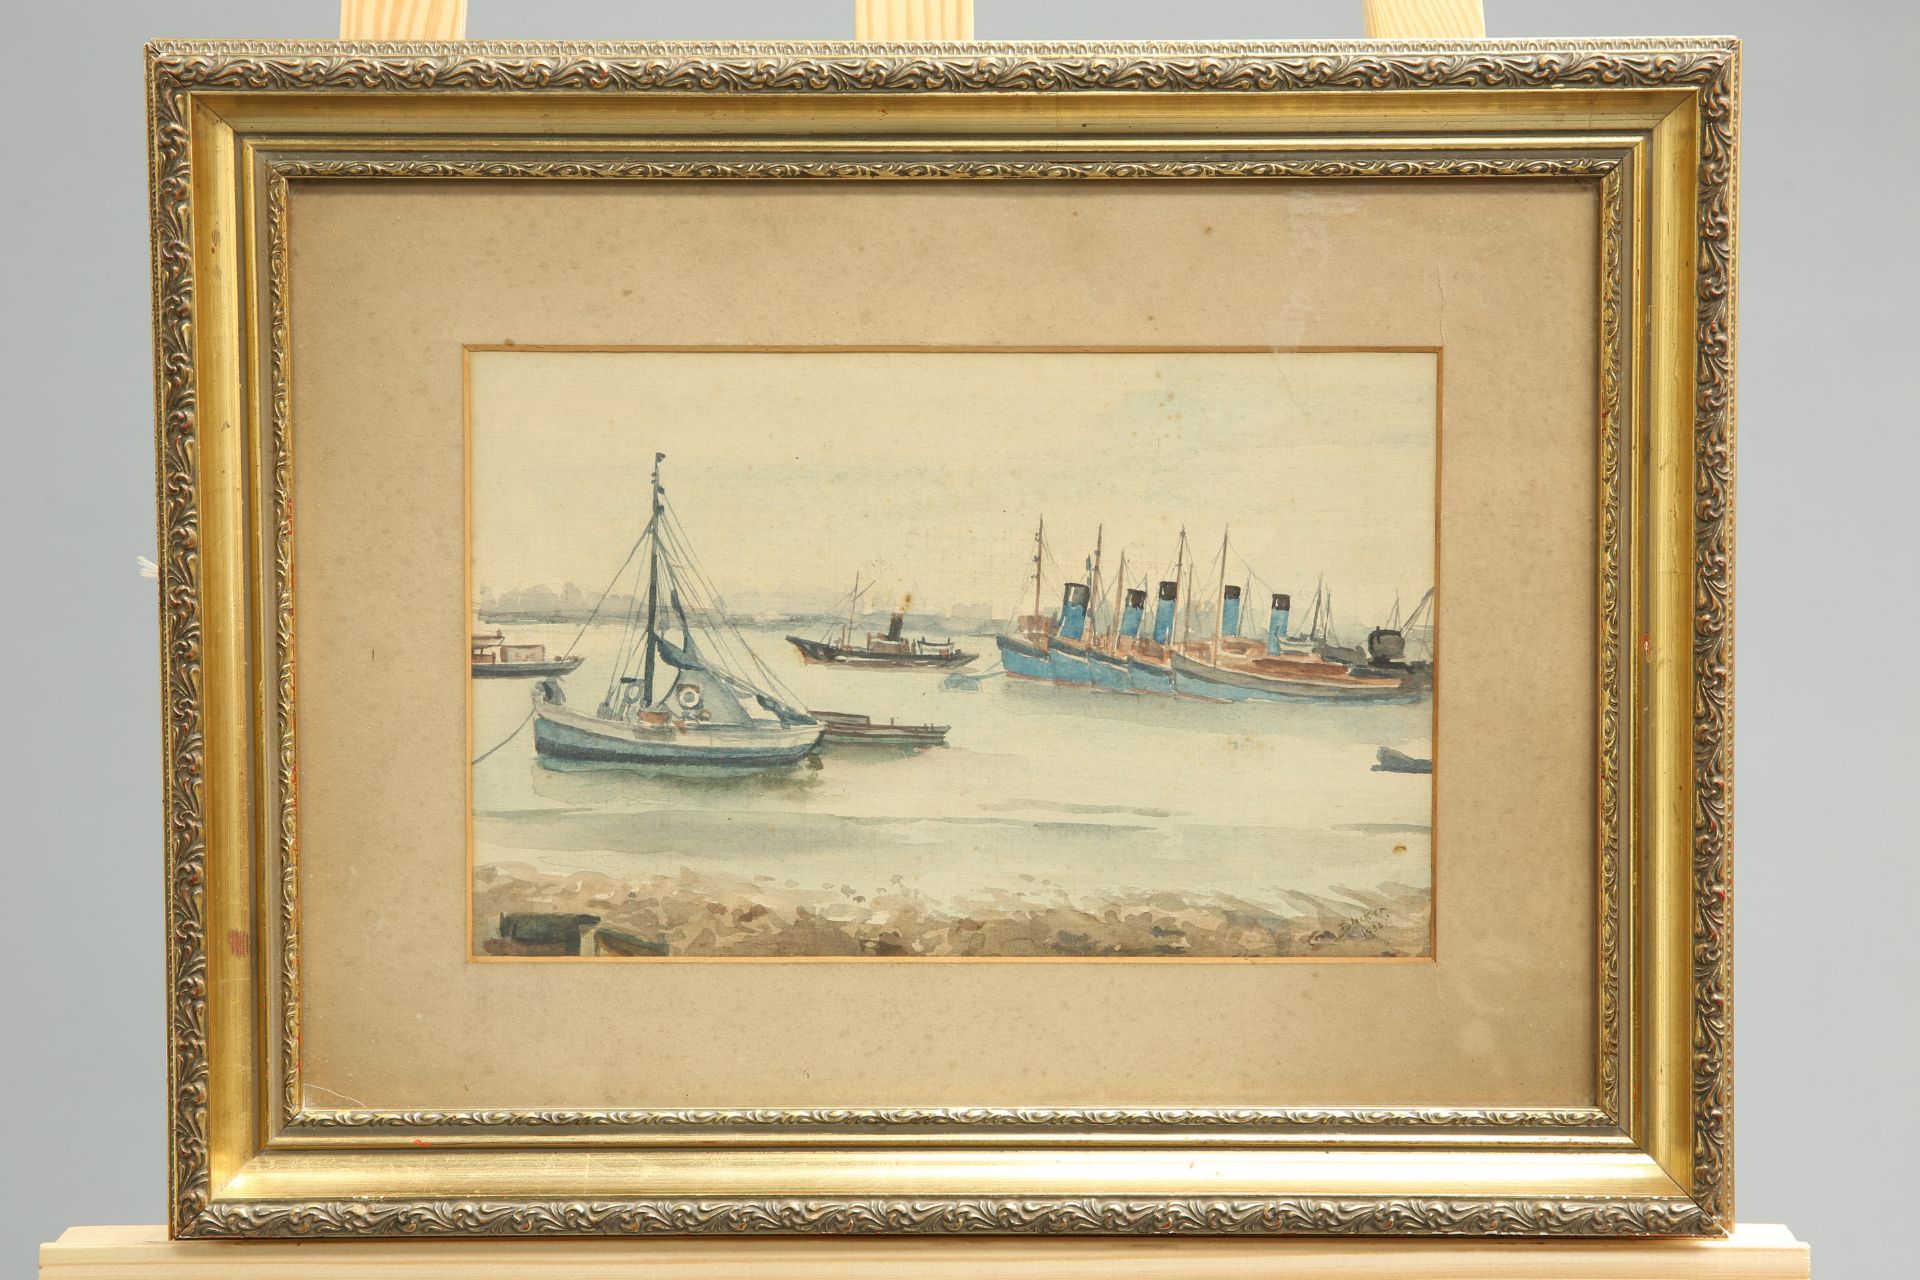 ELVA JOAN BLACKER (1908-1984), BOATS, signed and dated 1933 lower right, watercolour, framed. 18cm